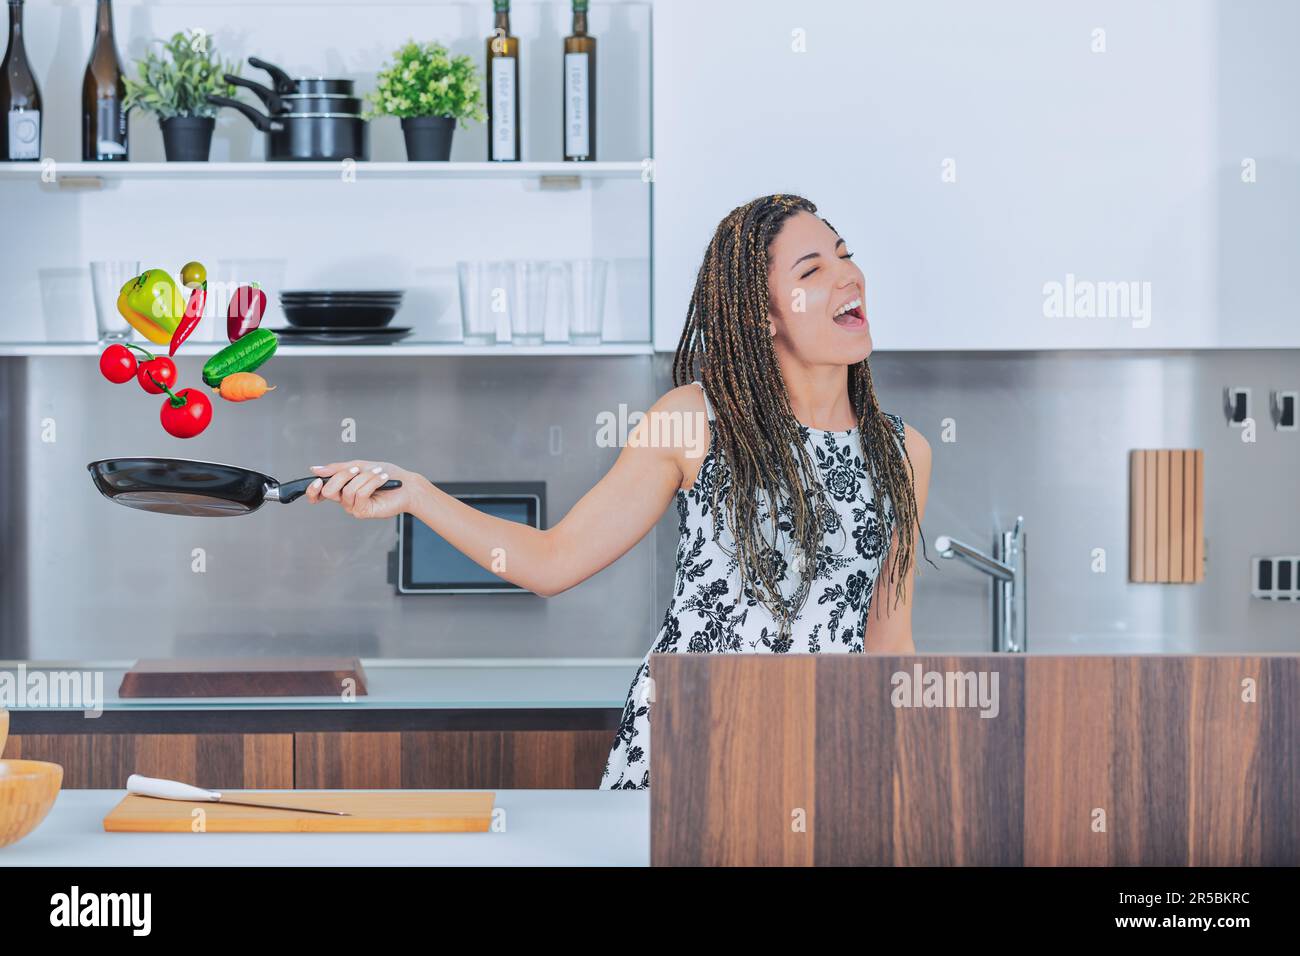 https://c8.alamy.com/comp/2R5BKRC/in-her-spacious-and-modern-kitchen-a-young-woman-joyfully-tosses-vibrant-vegetables-in-the-air-while-singing-she-enjoys-cooking-and-is-a-vegetarian-2R5BKRC.jpg